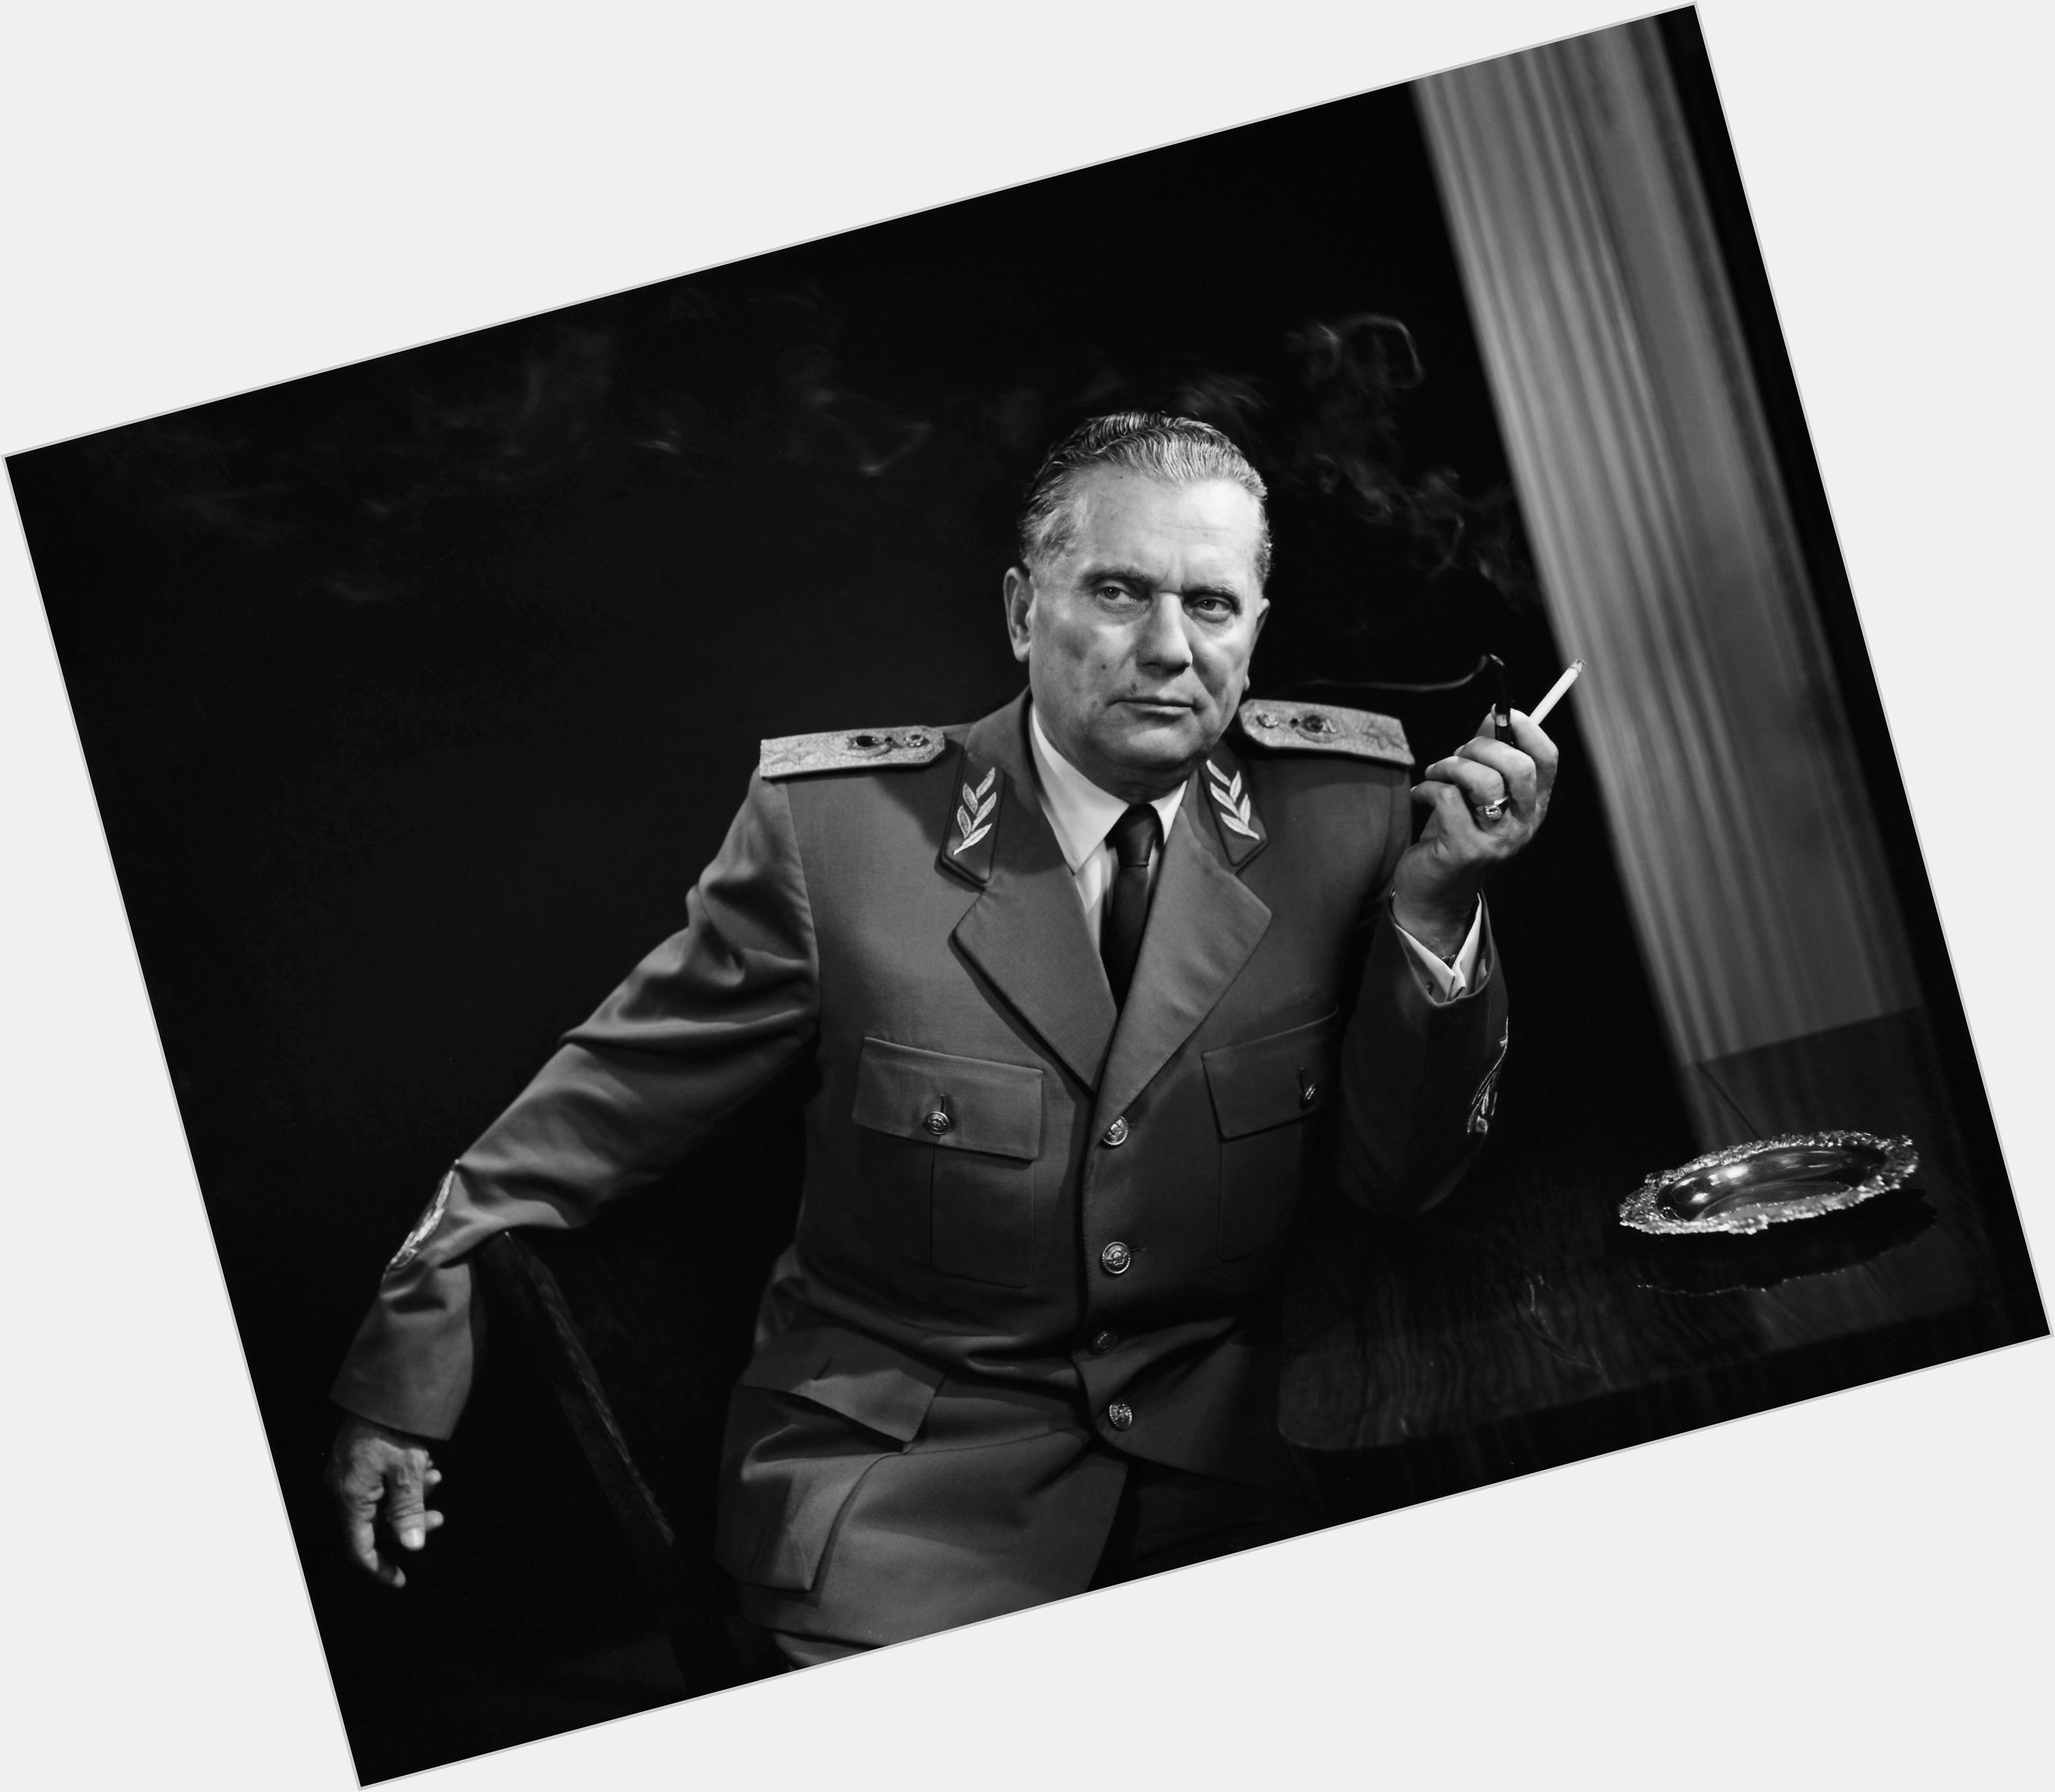 <a href="/hot-men/josip-broz-tito/is-he-where-buried-what-famous-why-called">Josip Broz Tito</a>  